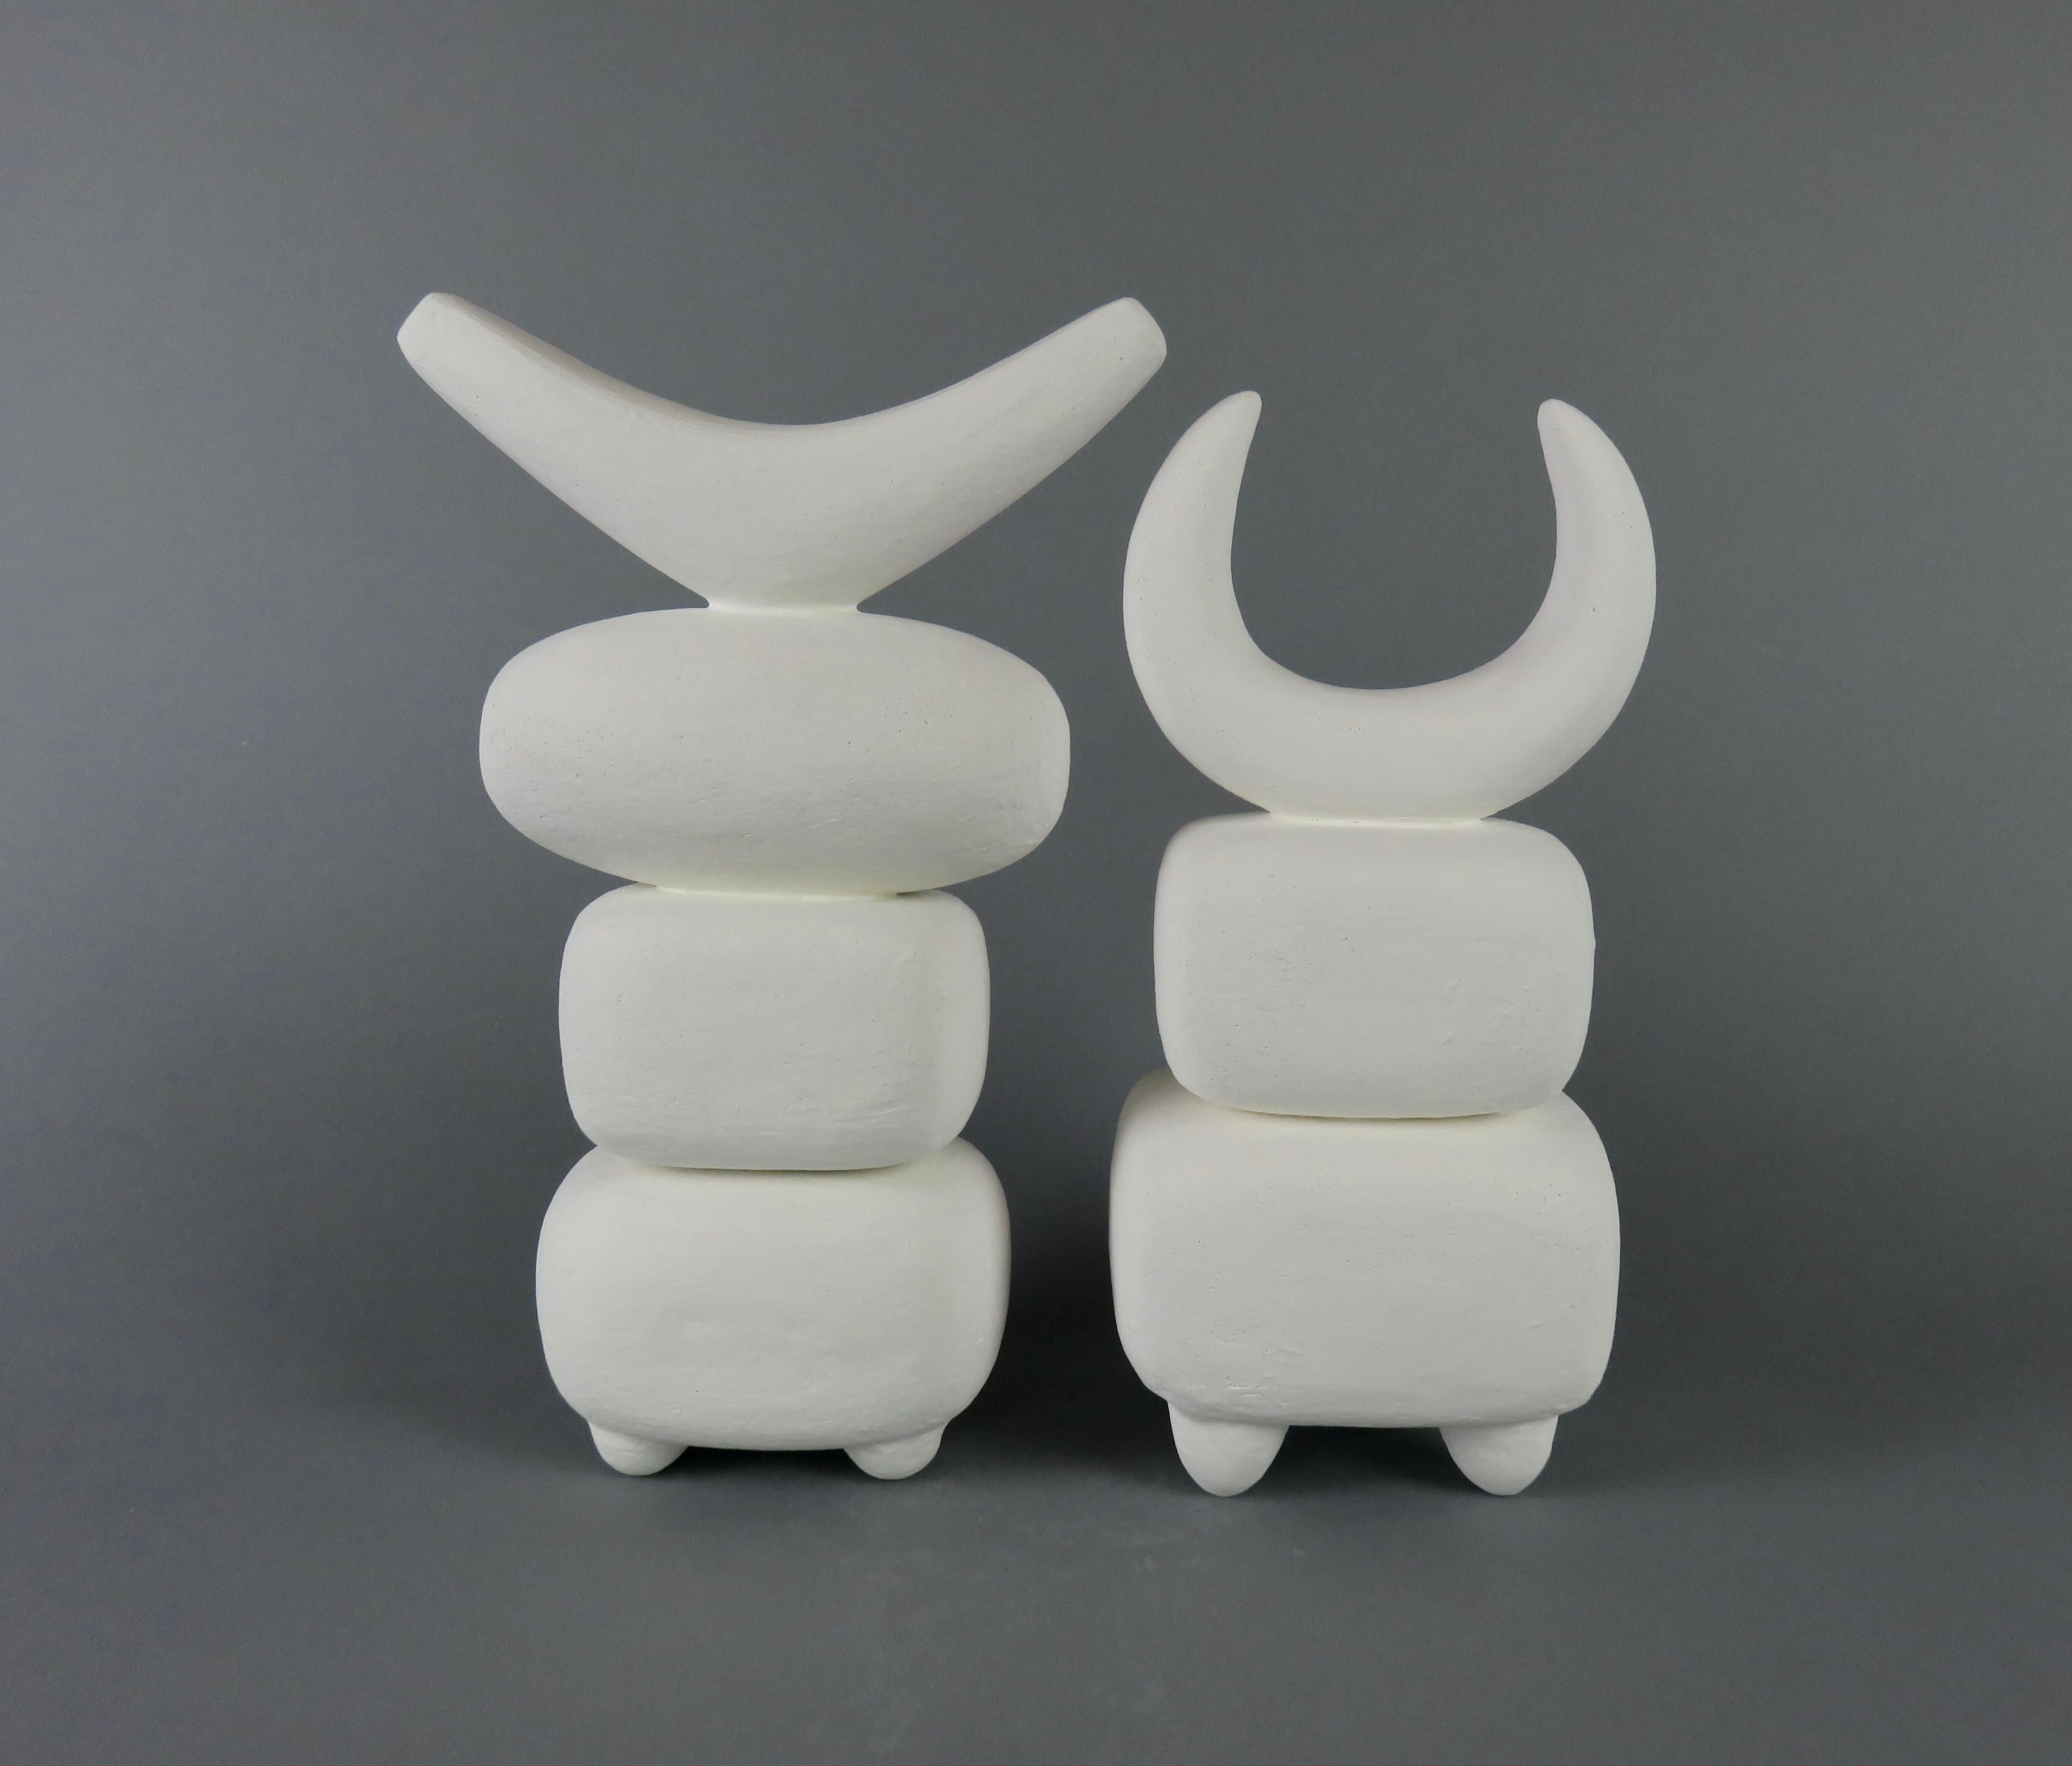 White Winged Crown, 4 Part Ceramic TOTEM, Hand Built Sculpture by H. Starcevic For Sale 4